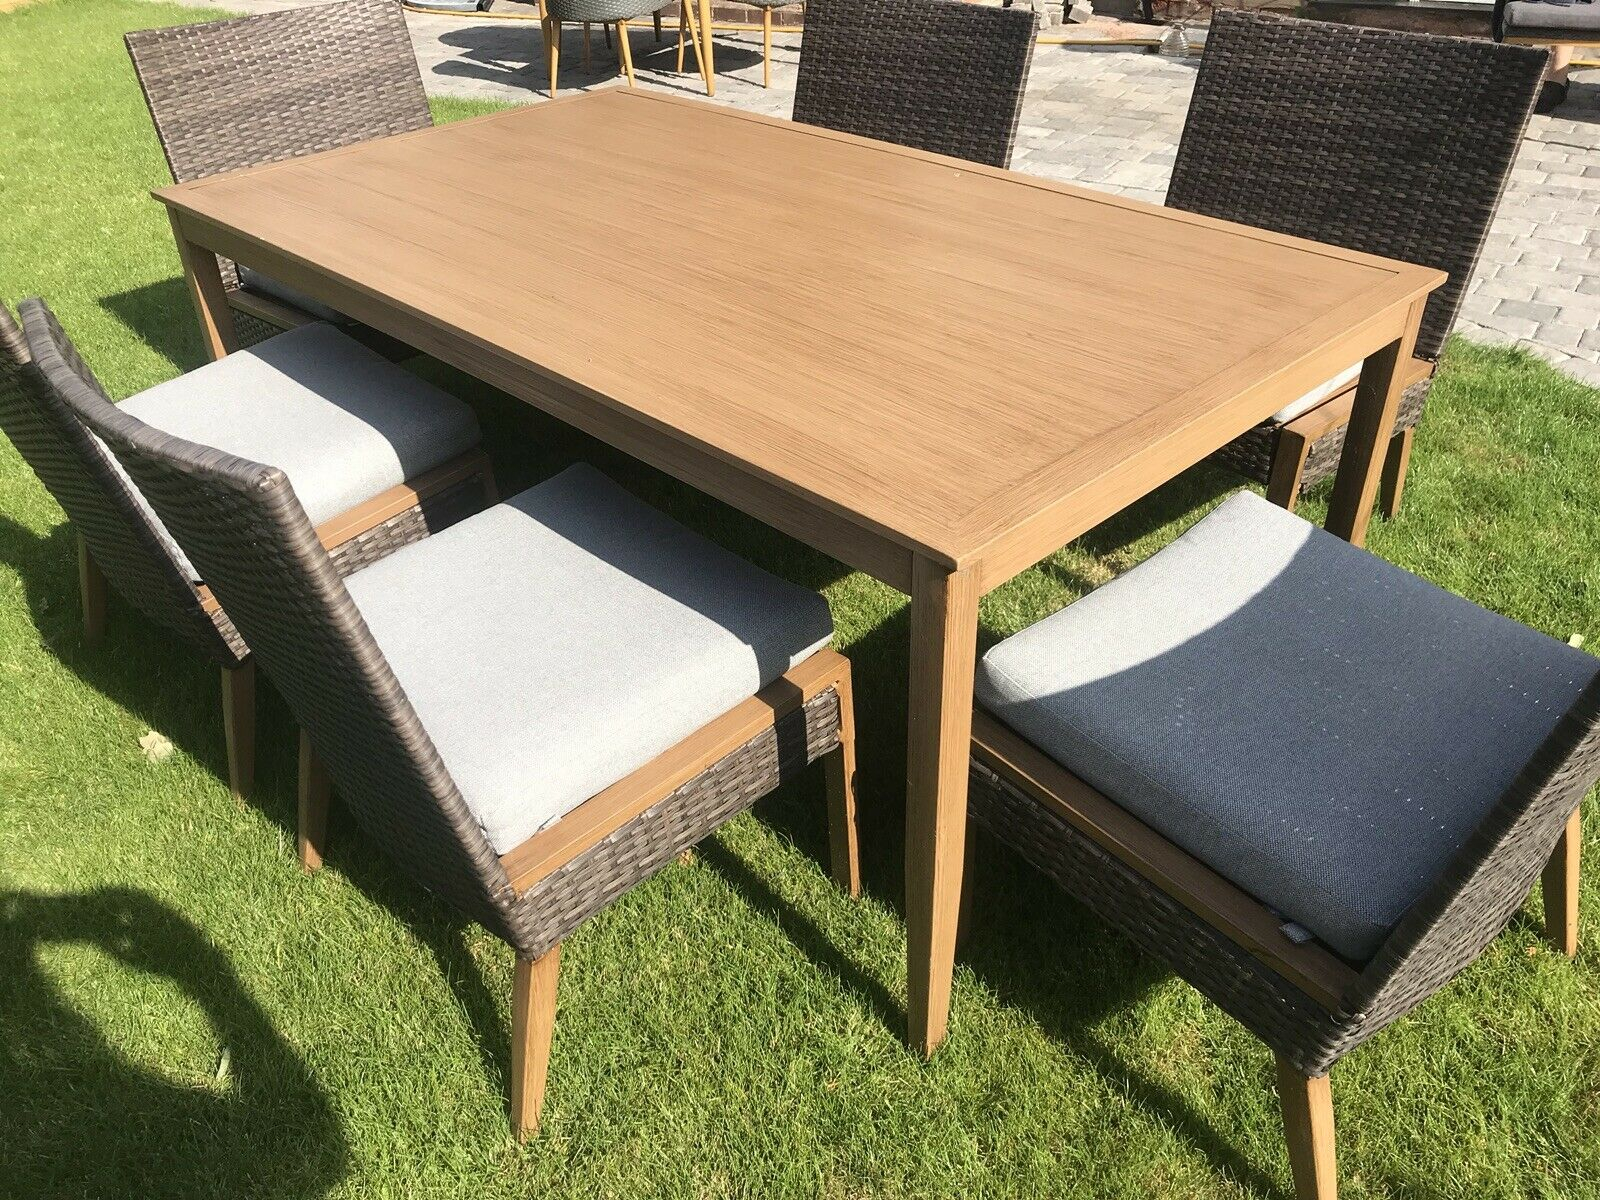 6 Seater Patio Dining Set Outdoor Garden Furniture Table And Chairs With Cushion inside size 1600 X 1200